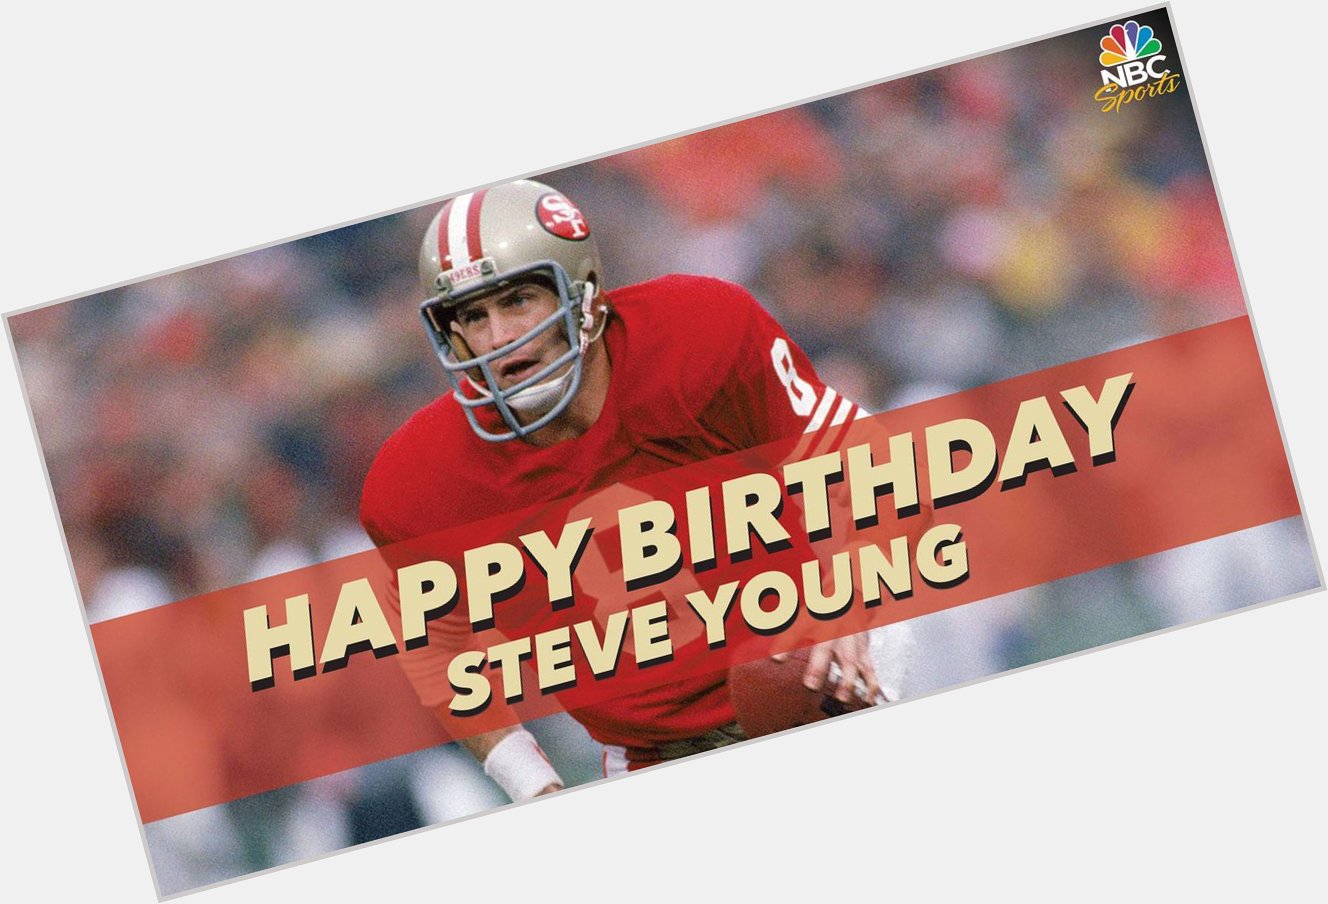 Happy birthday to legend Steve Young!  